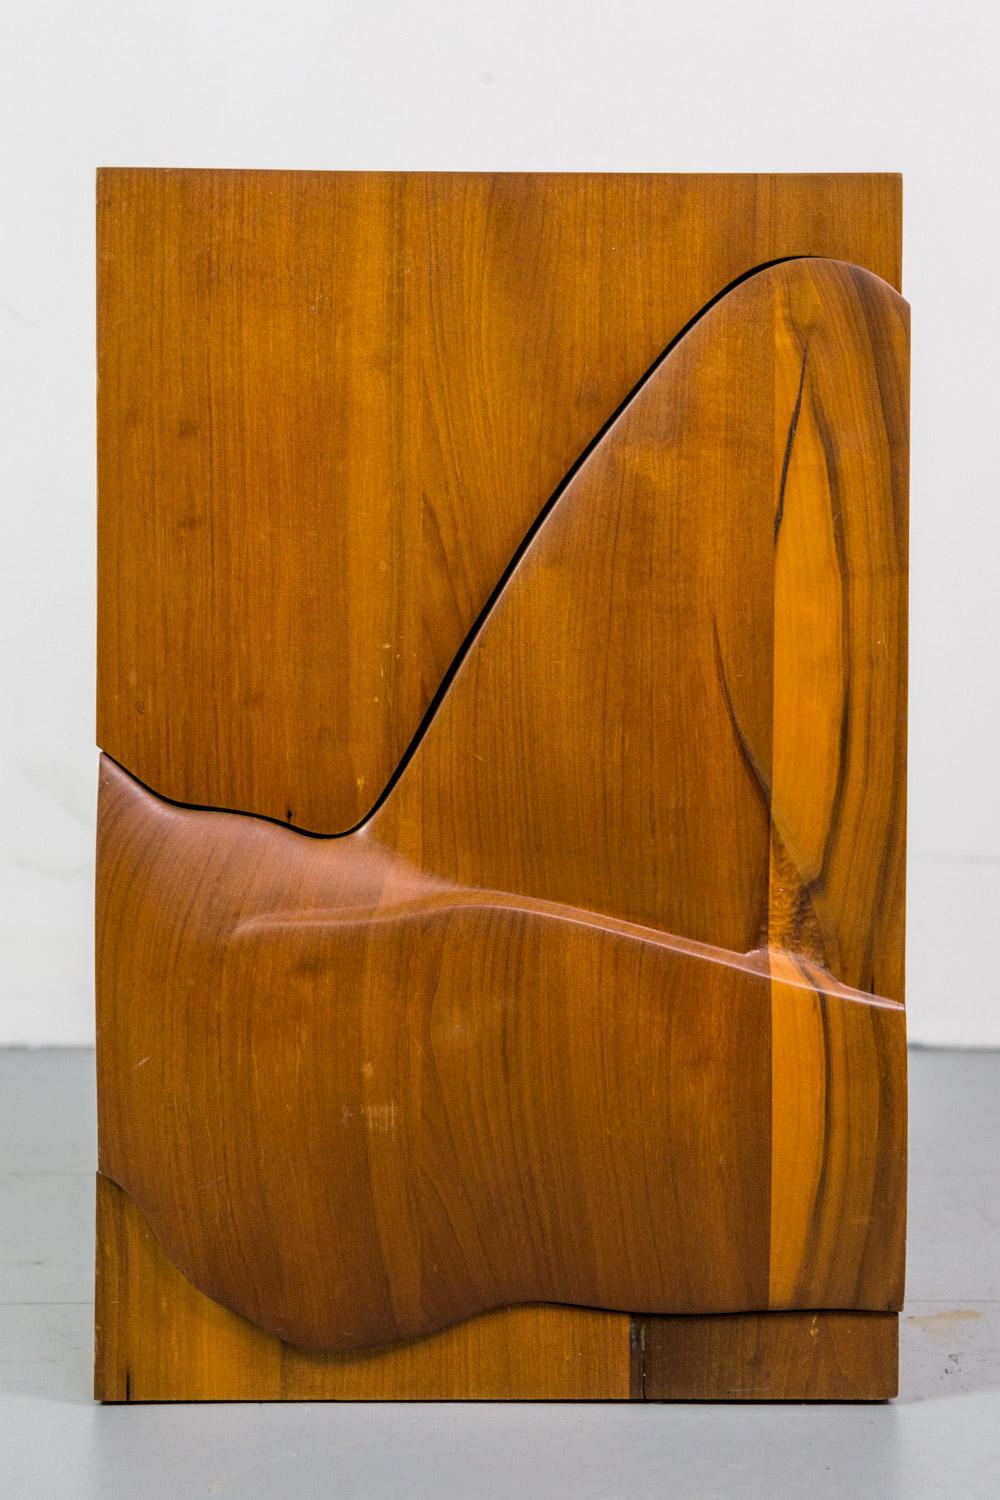 Sculptural freeform cabinet or chest in solid walnut.